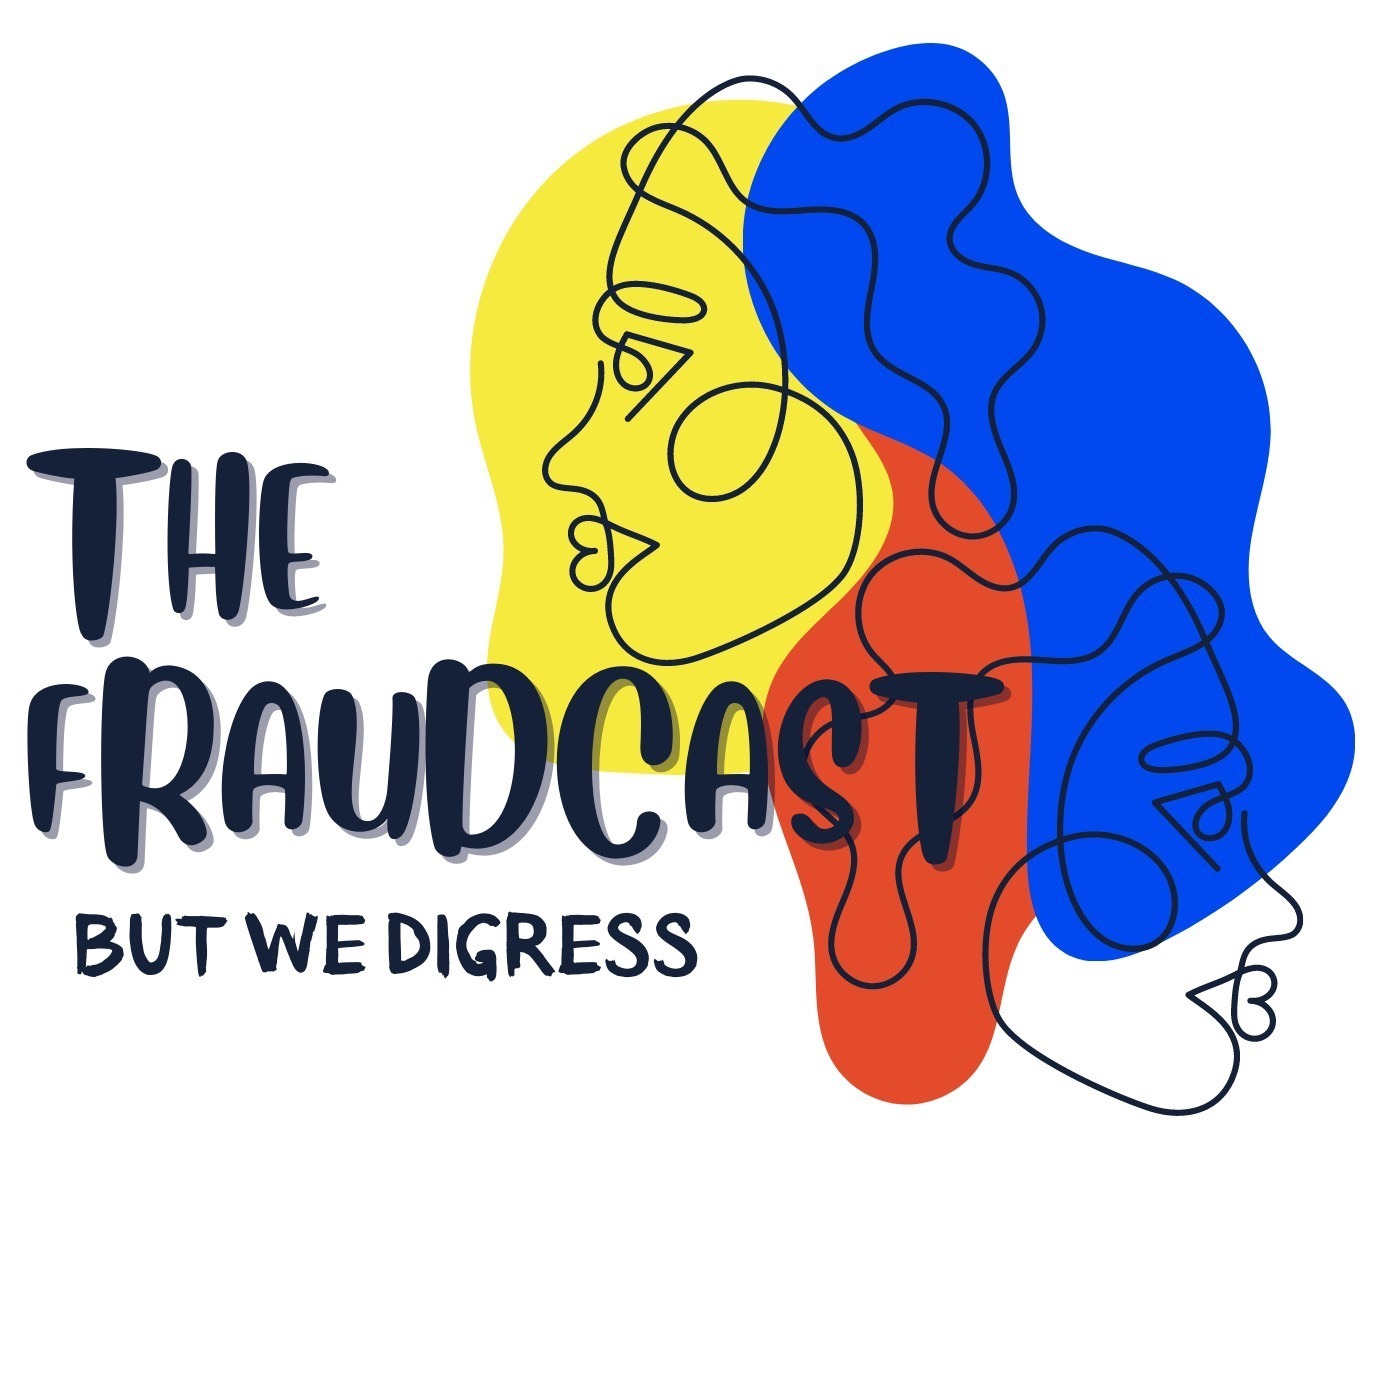 The Fraudcast: But We Digress podcast